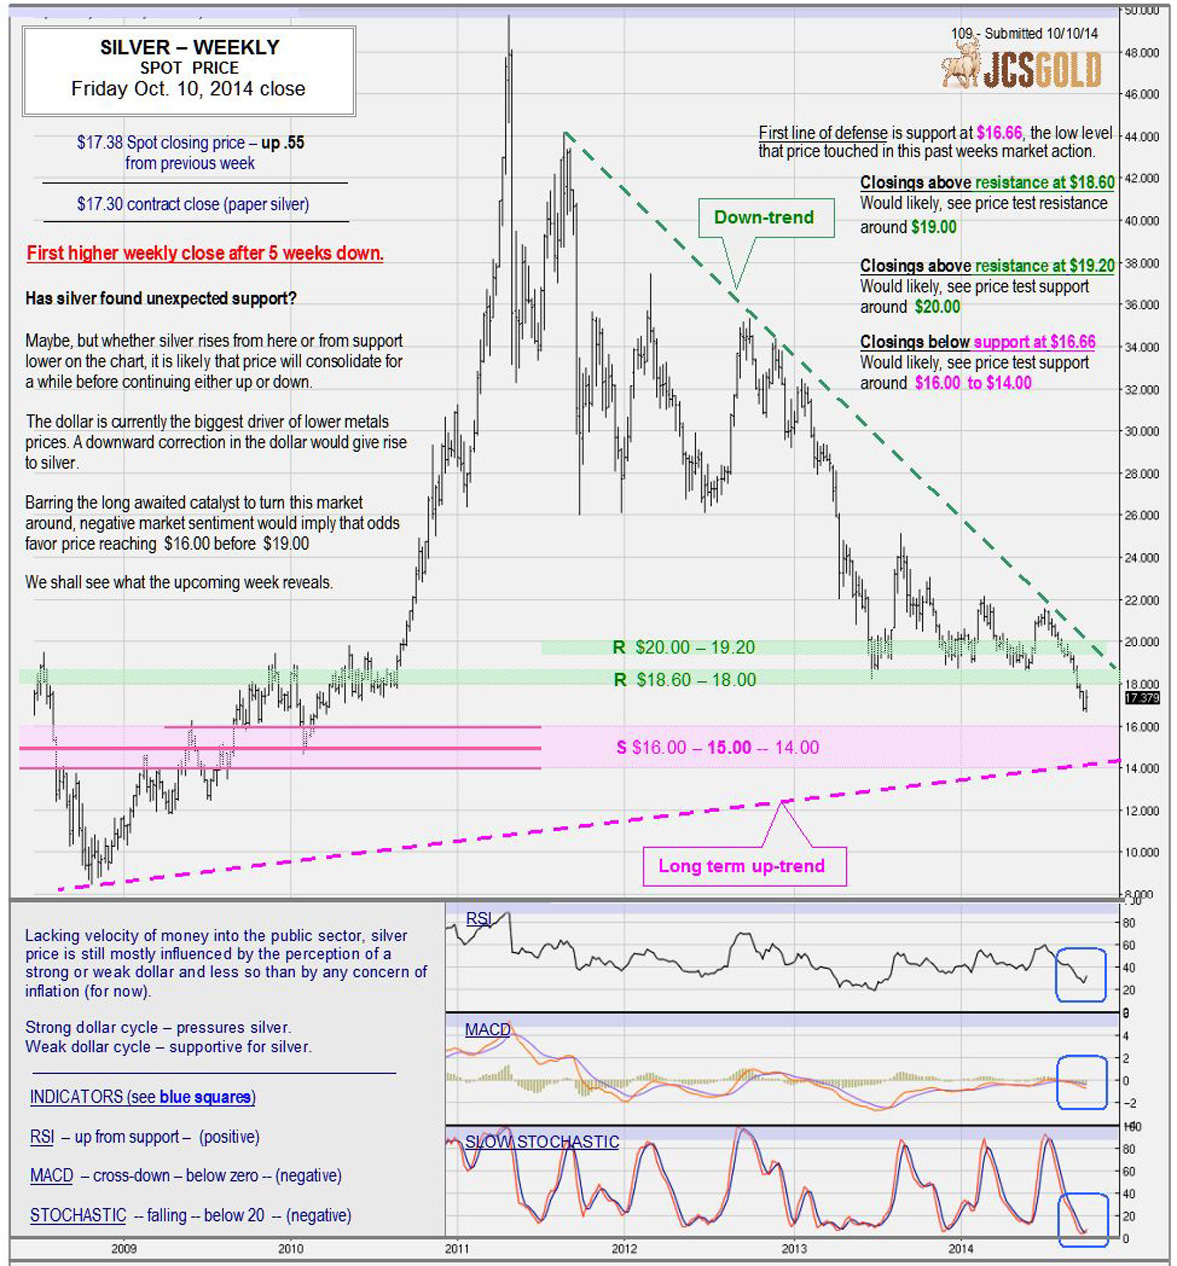 Oct. 10, 2014 chart & commentary